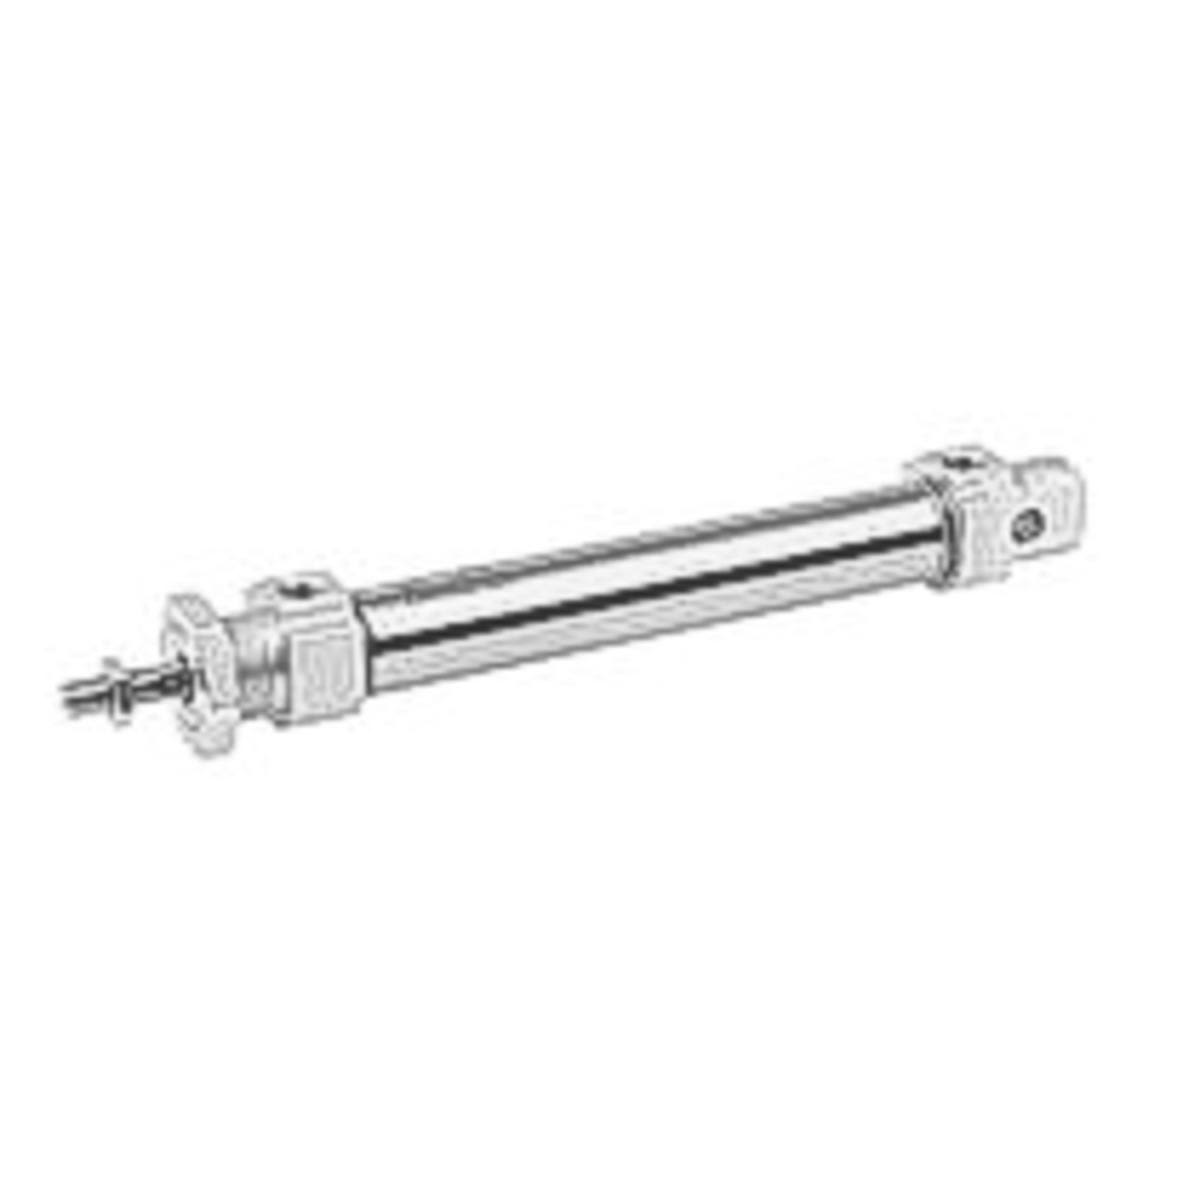 Aventics Pneumatic Cylinder - 25mm Bore, 25mm Stroke, MNI Series, Double Acting